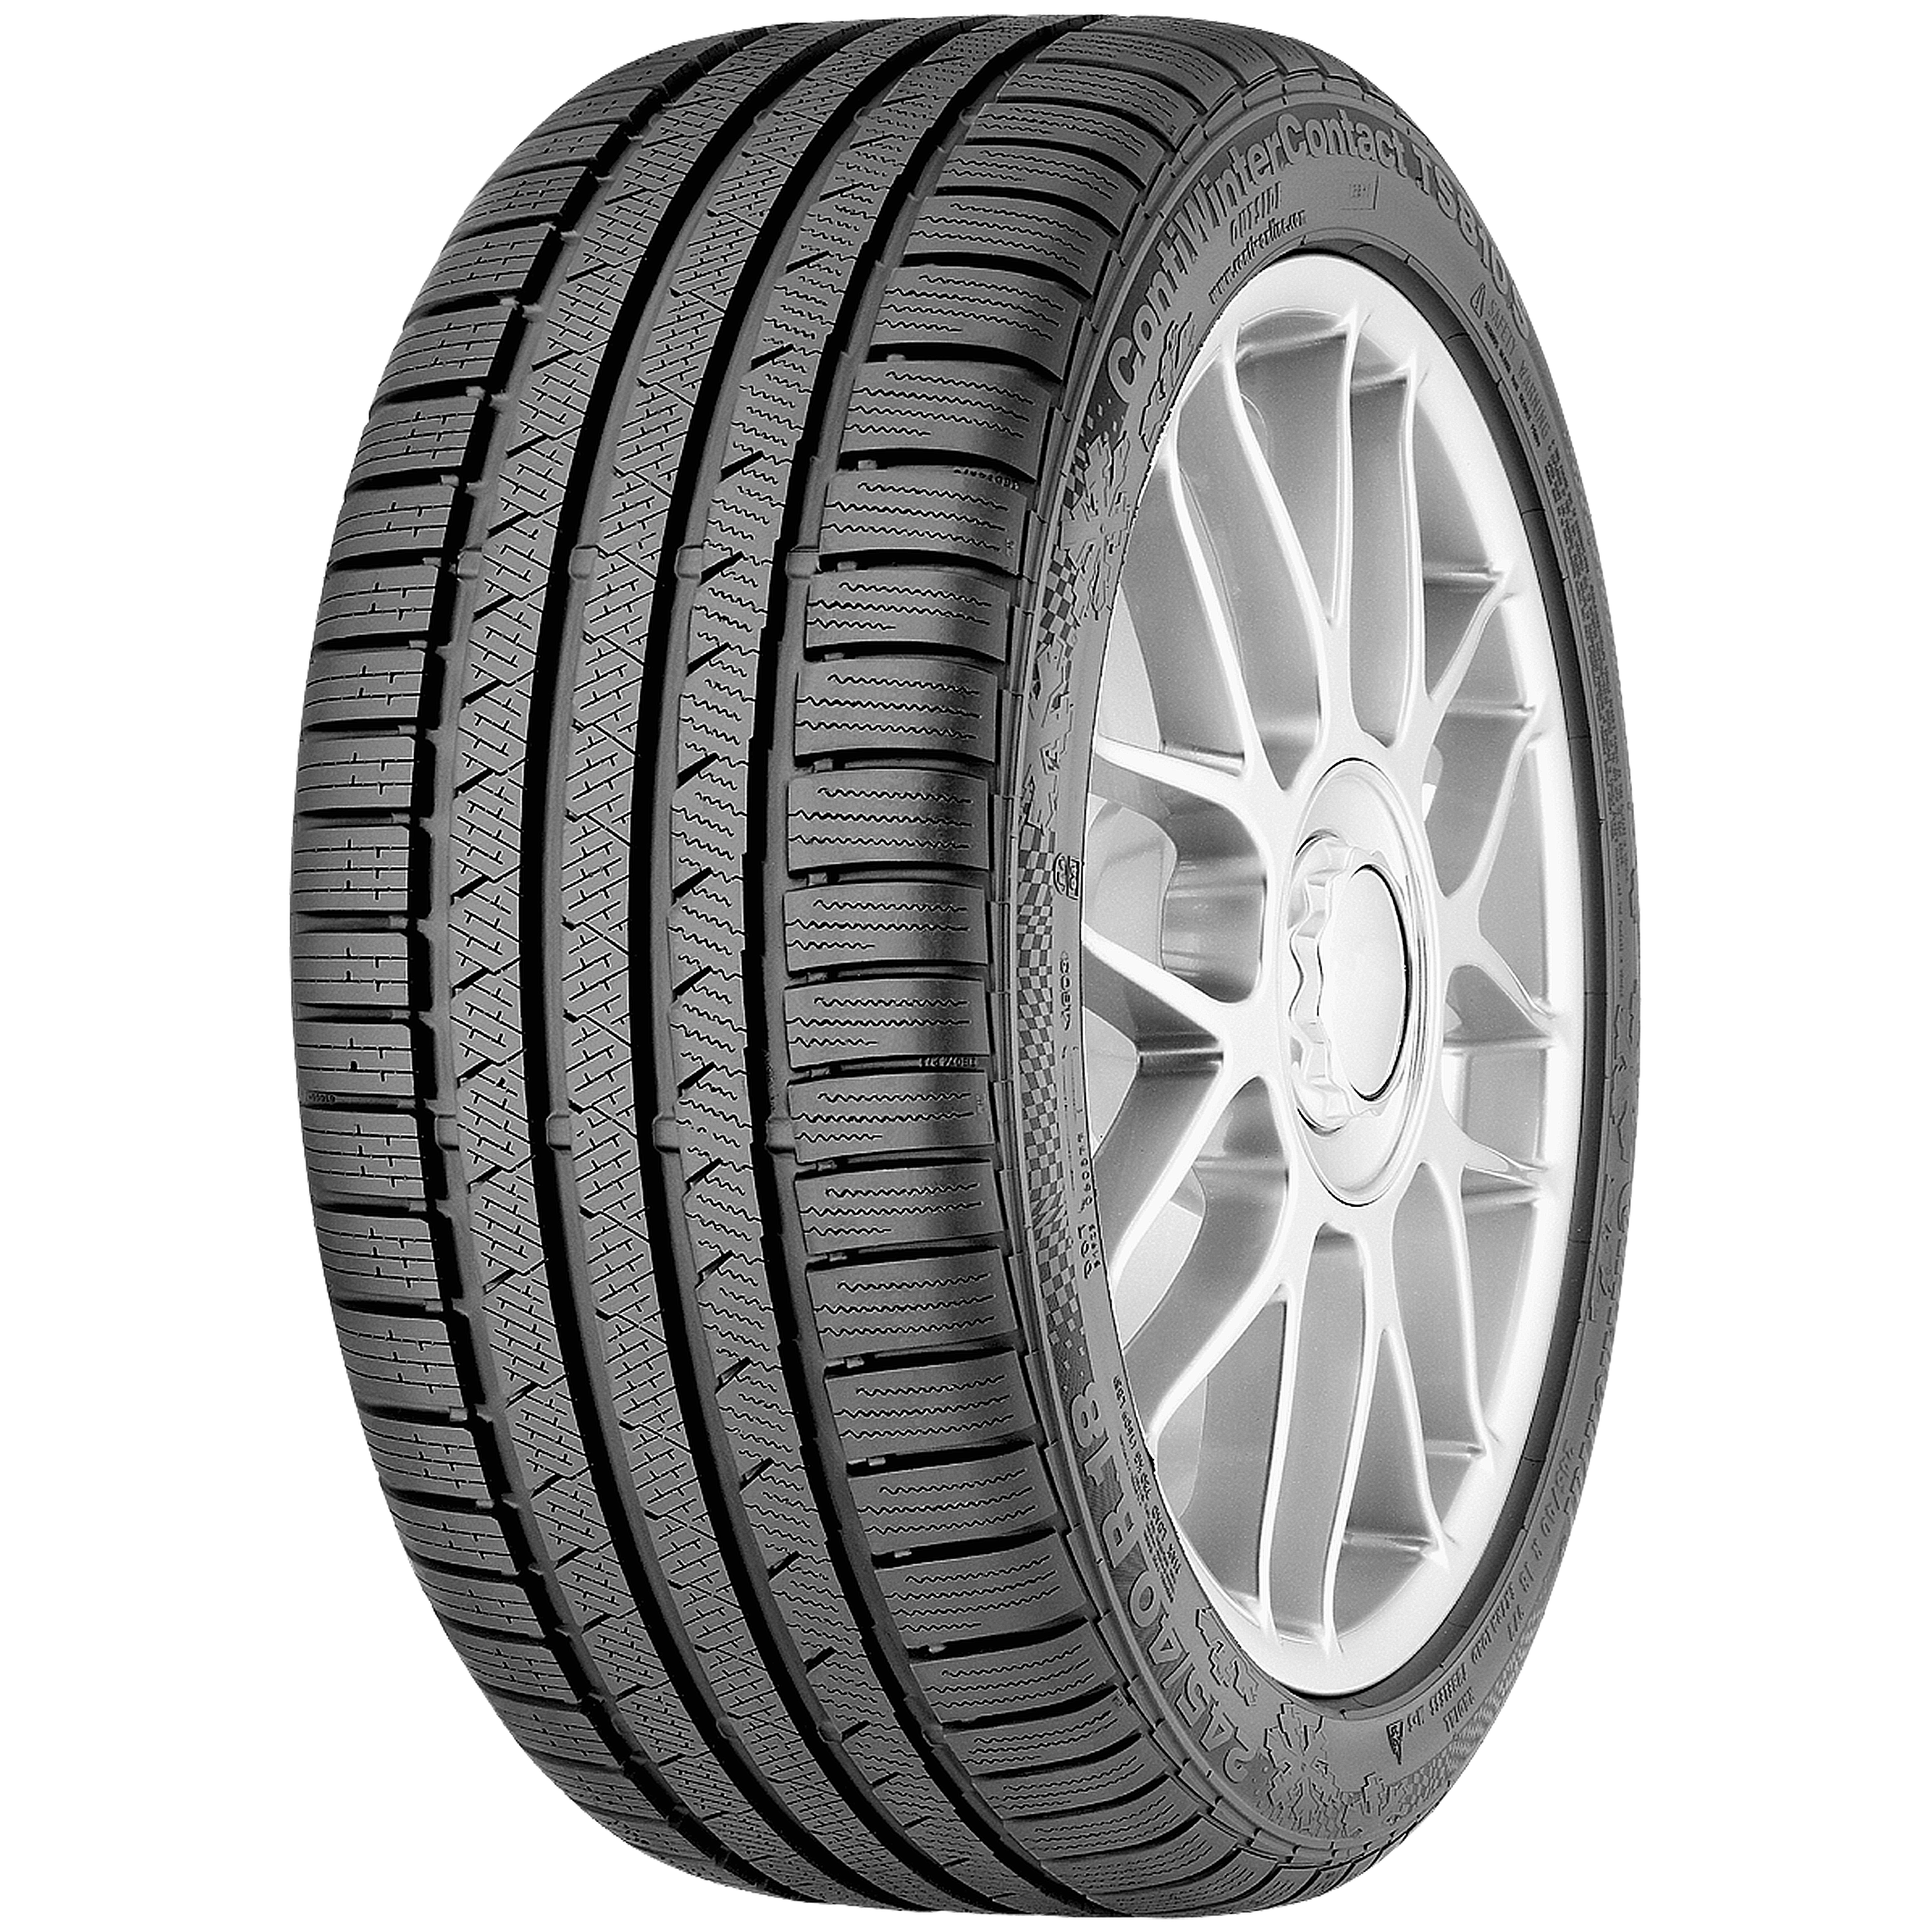 ContiWinterContact TS 810 S: The tire powerful for cars luxury-class medium winter and sporty